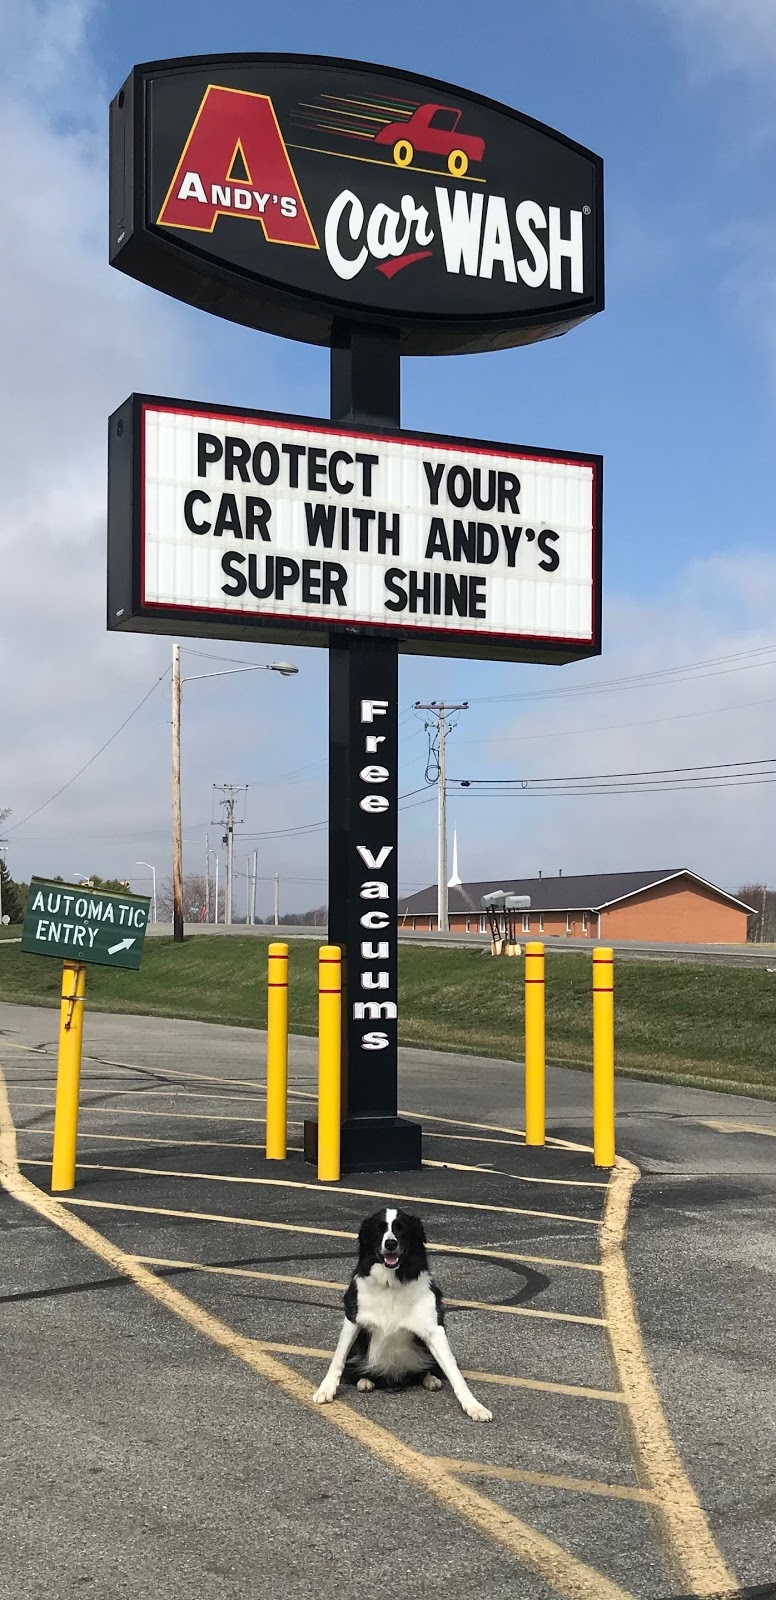 Andys Car Wash | 255 Frontage Rd, Columbia City, IN 46725 | Phone: (260) 244-4550